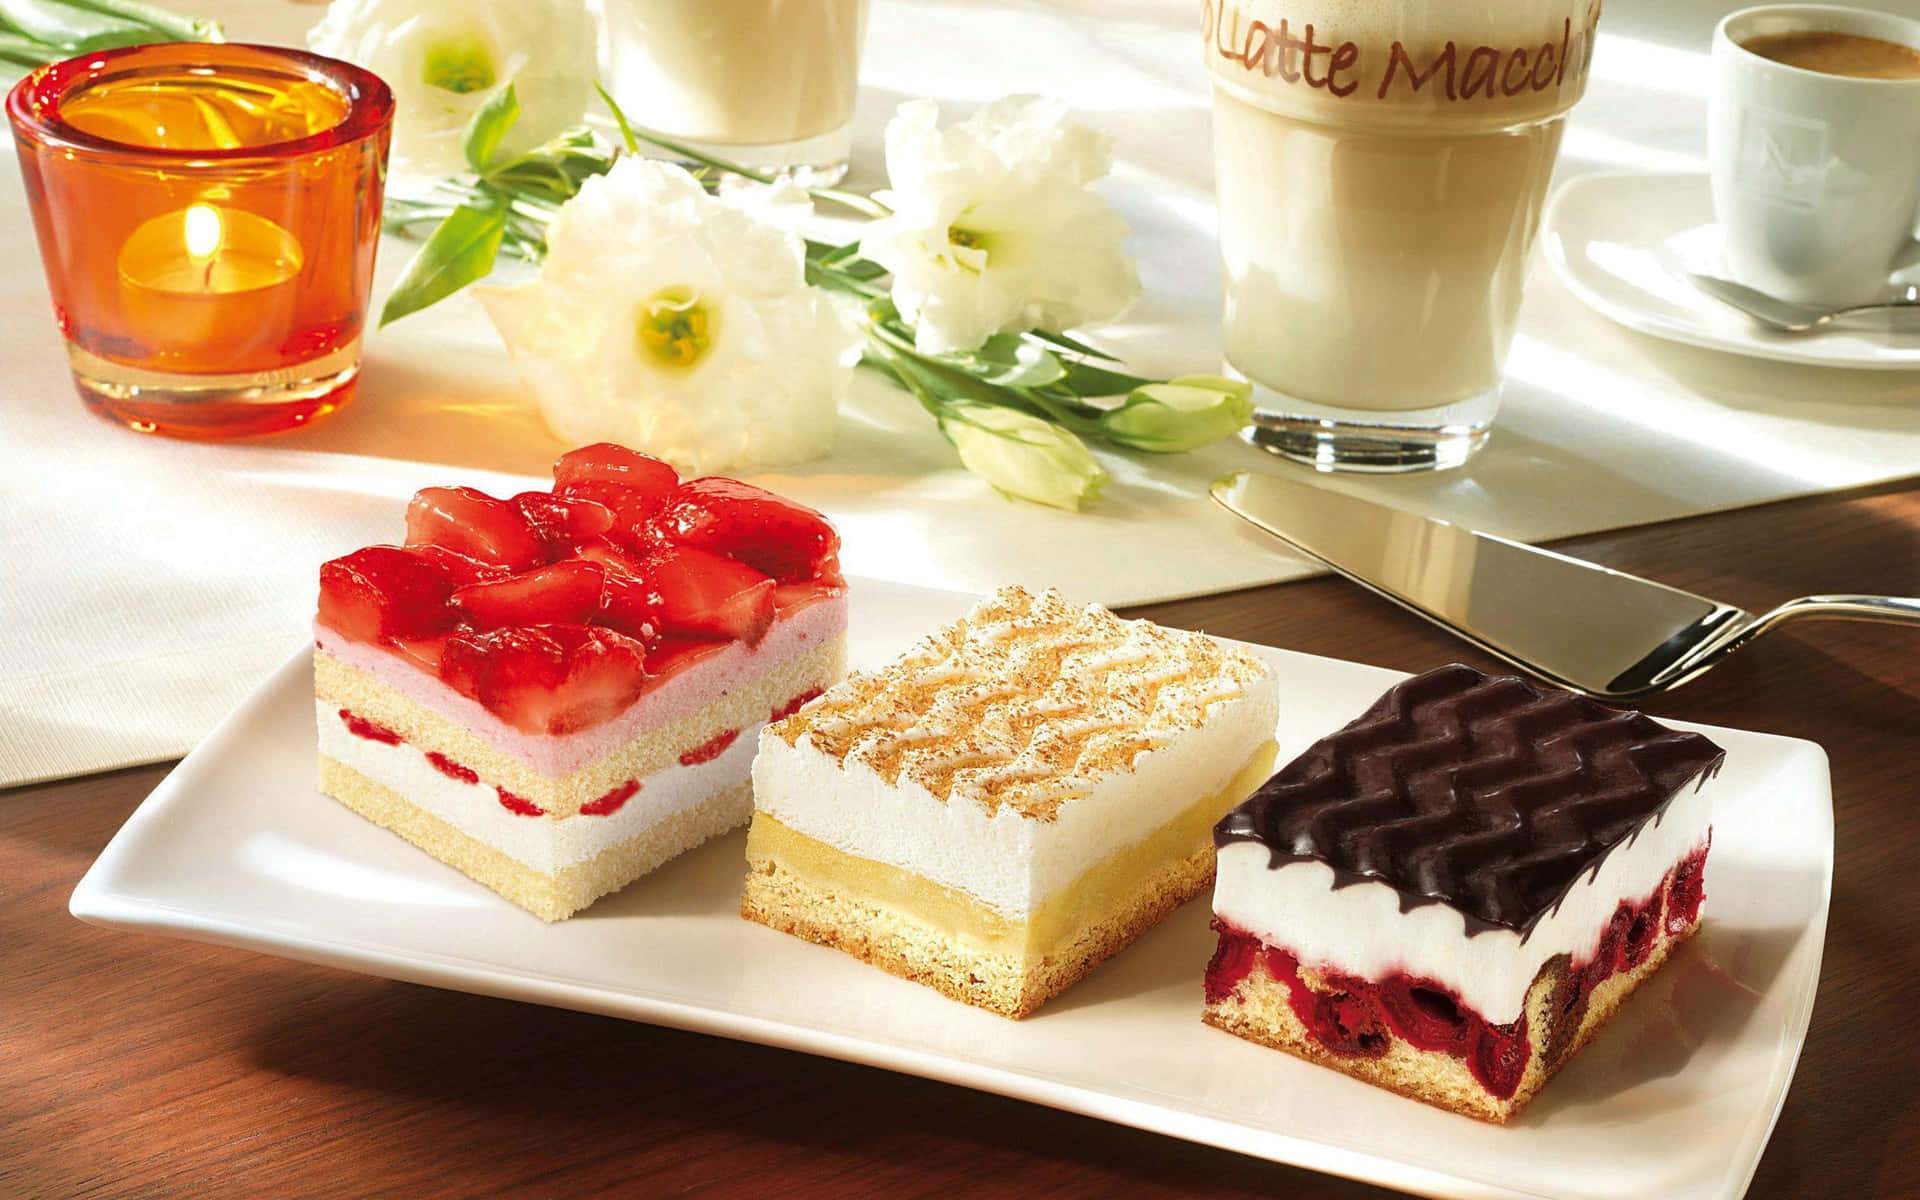 Delicious&Delightful - Enjoy These Perfectly Prepared Pastries